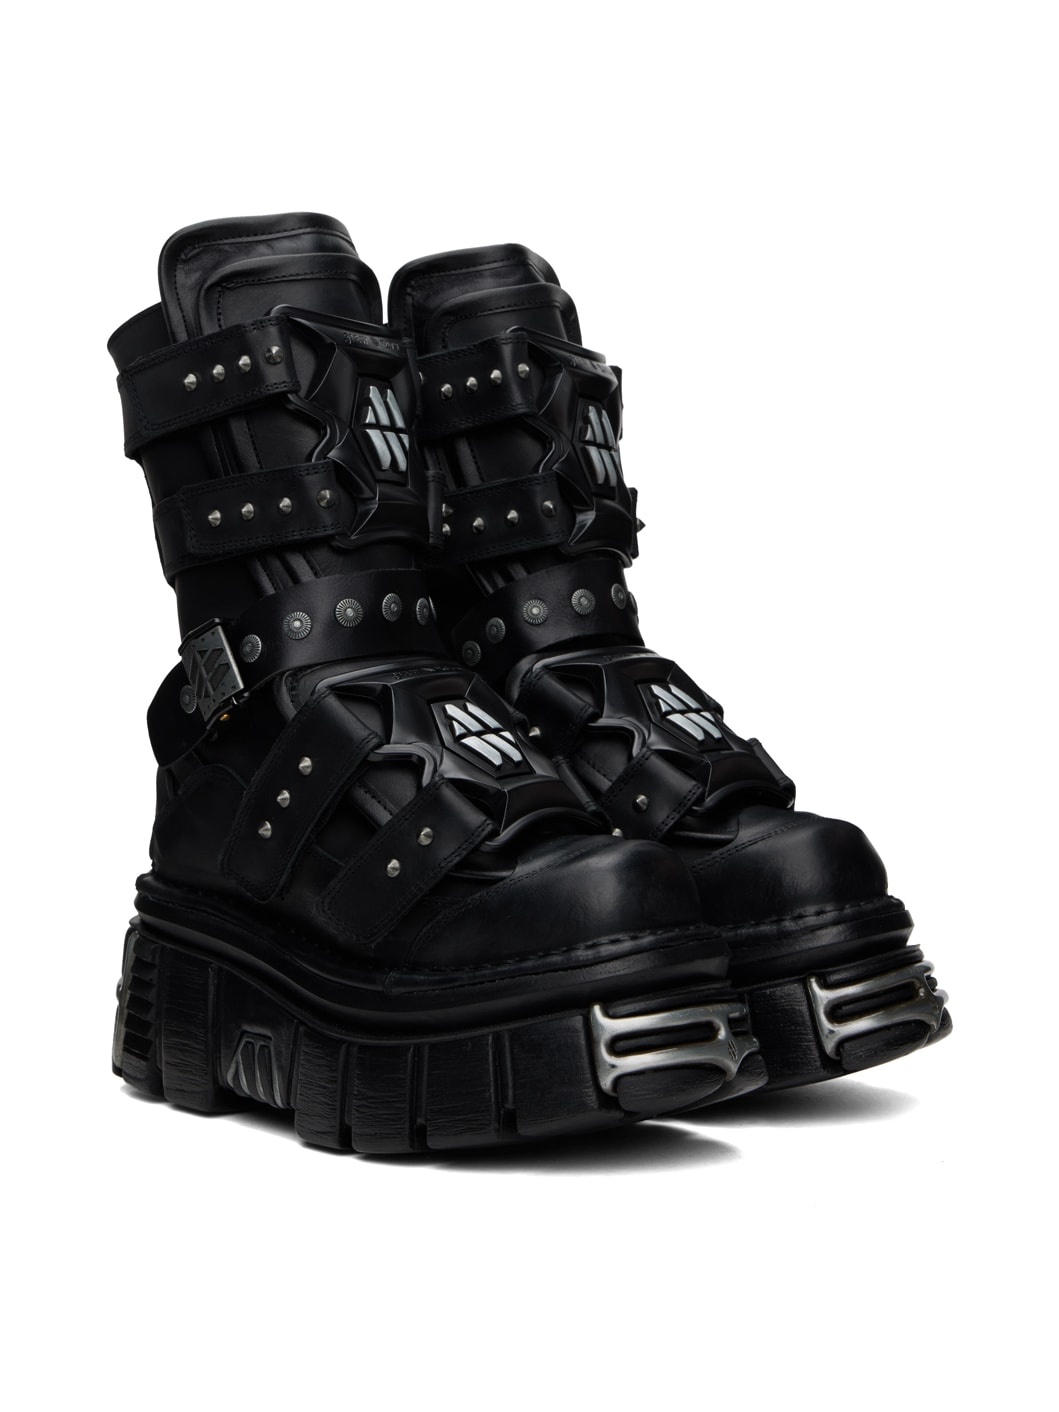 Black New Rock Edition Gamer Boots - 4